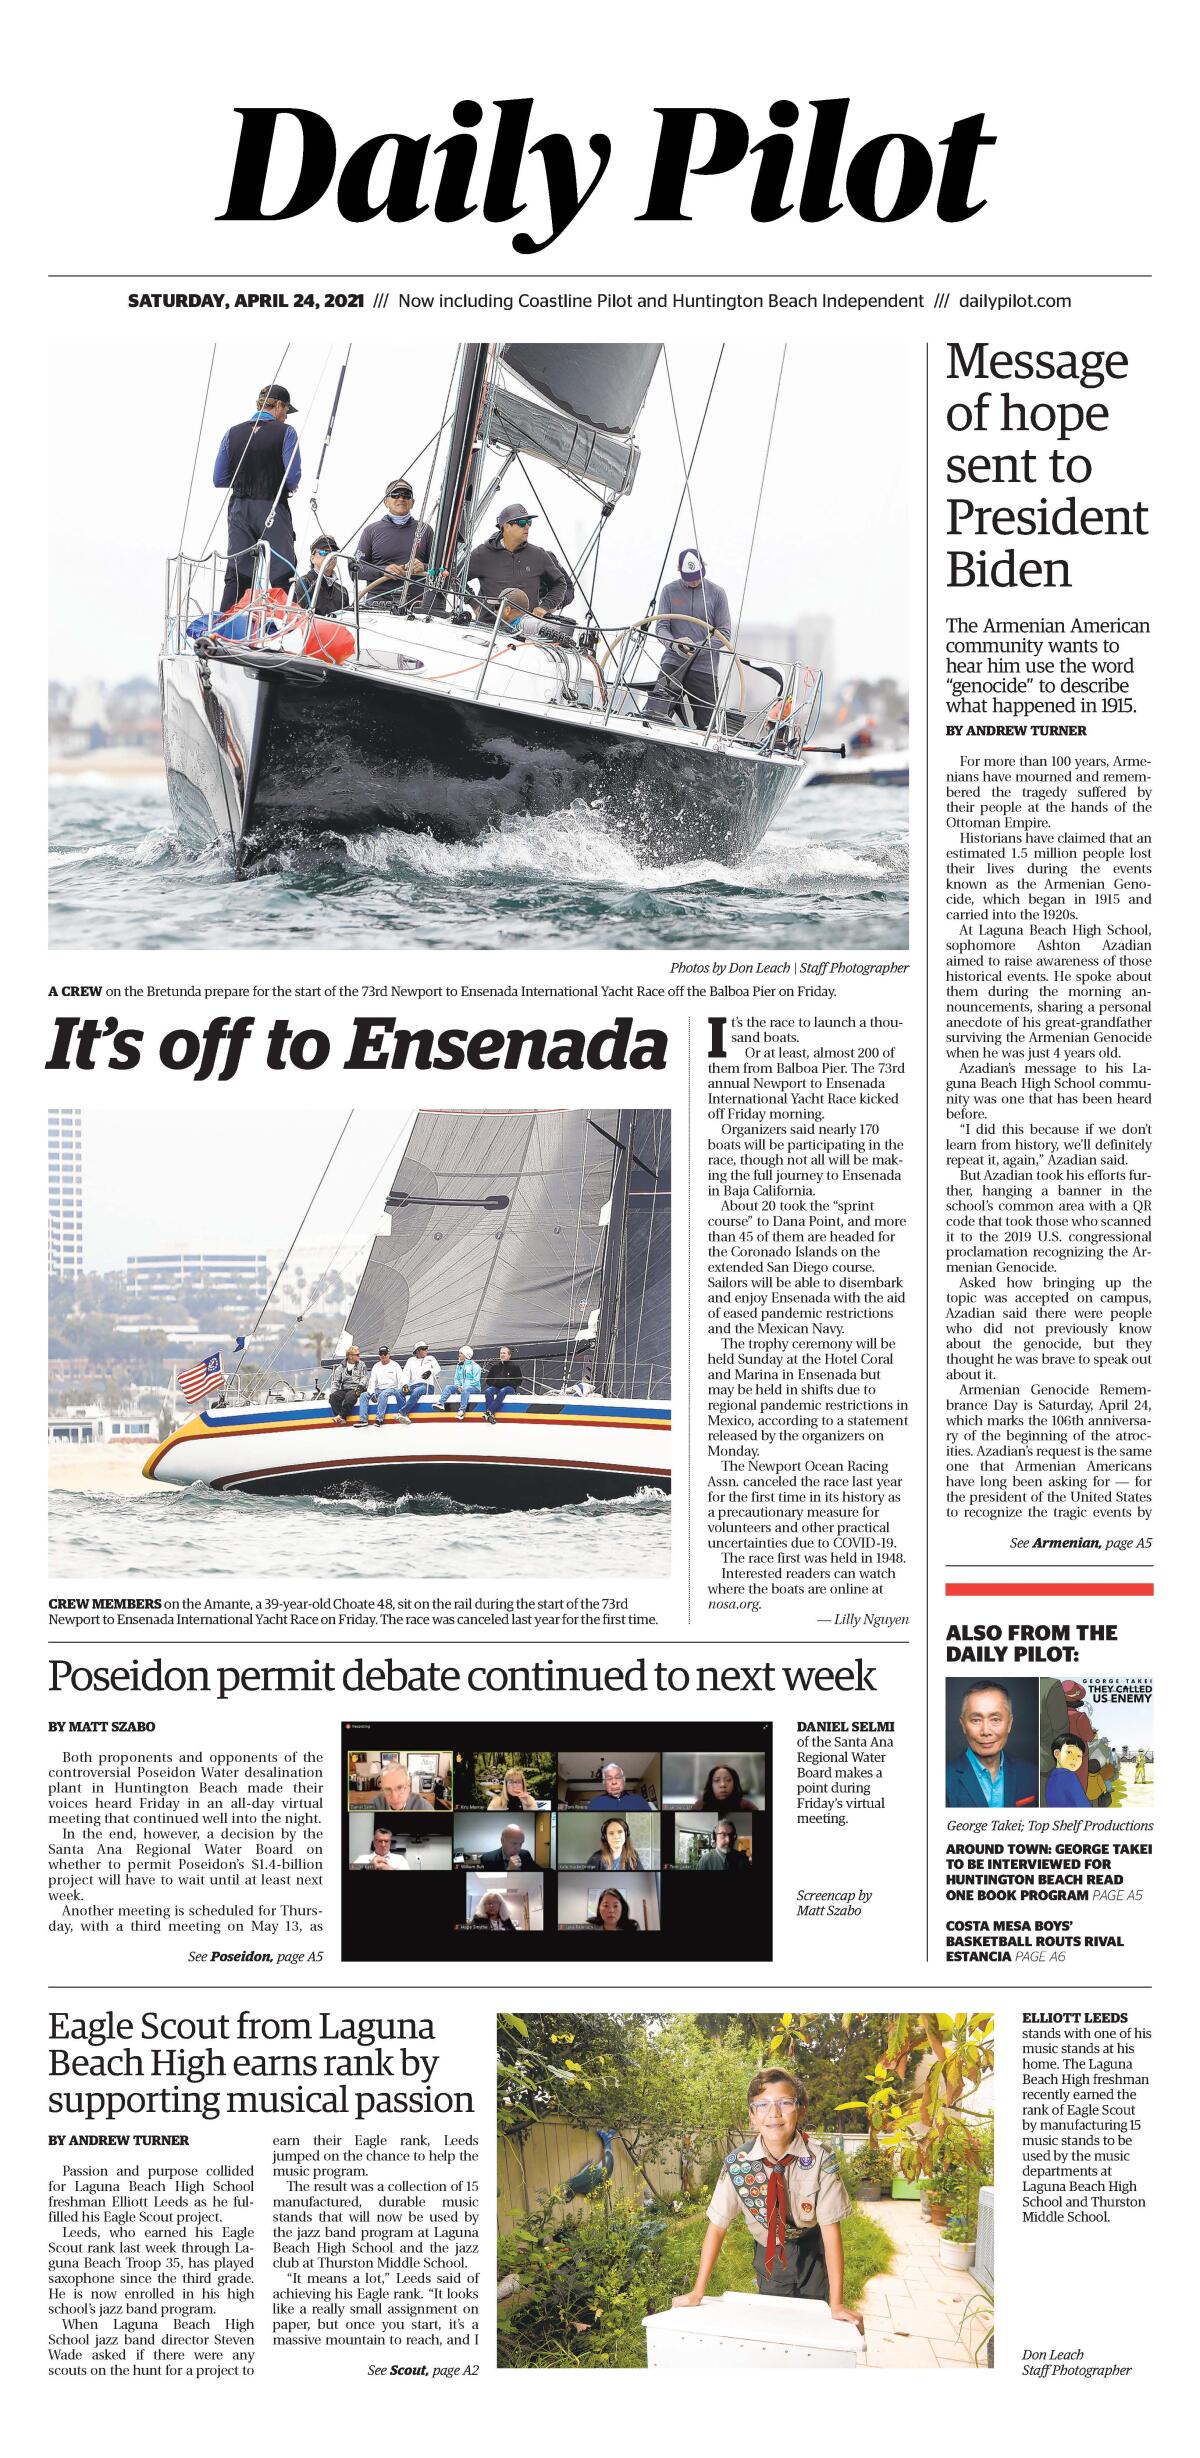 Front page of Daily Pilot e-newspaper for Saturday, April 24, 2021.